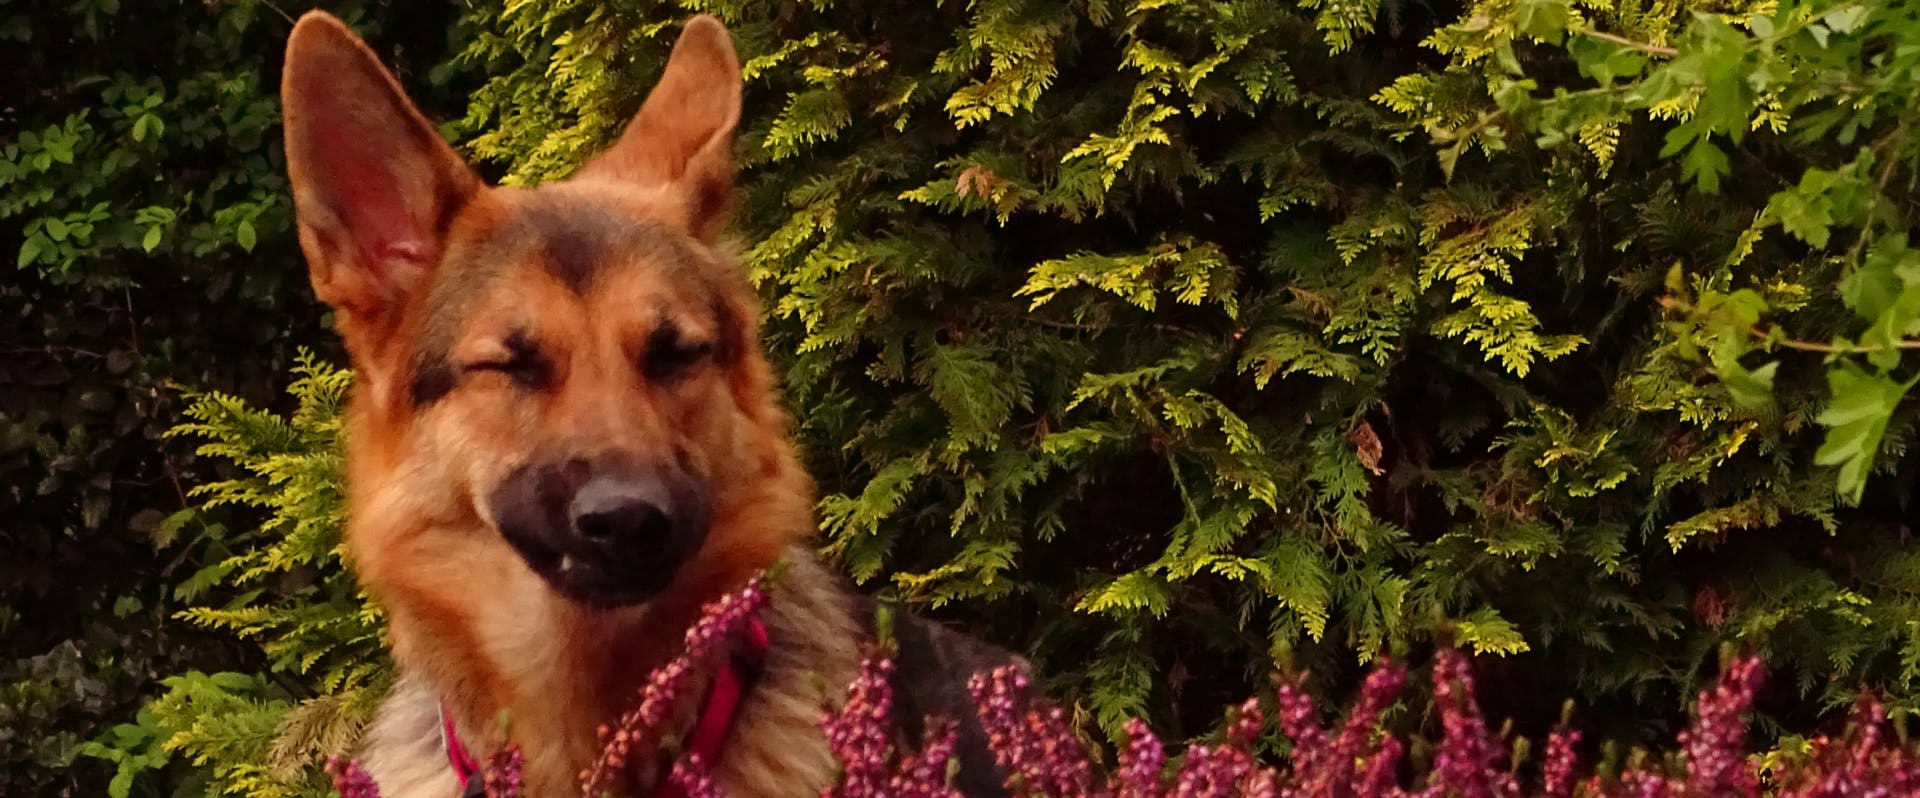 a german shepherd sat next to bush of pink flowers closing its eyes as it's about to sneeze